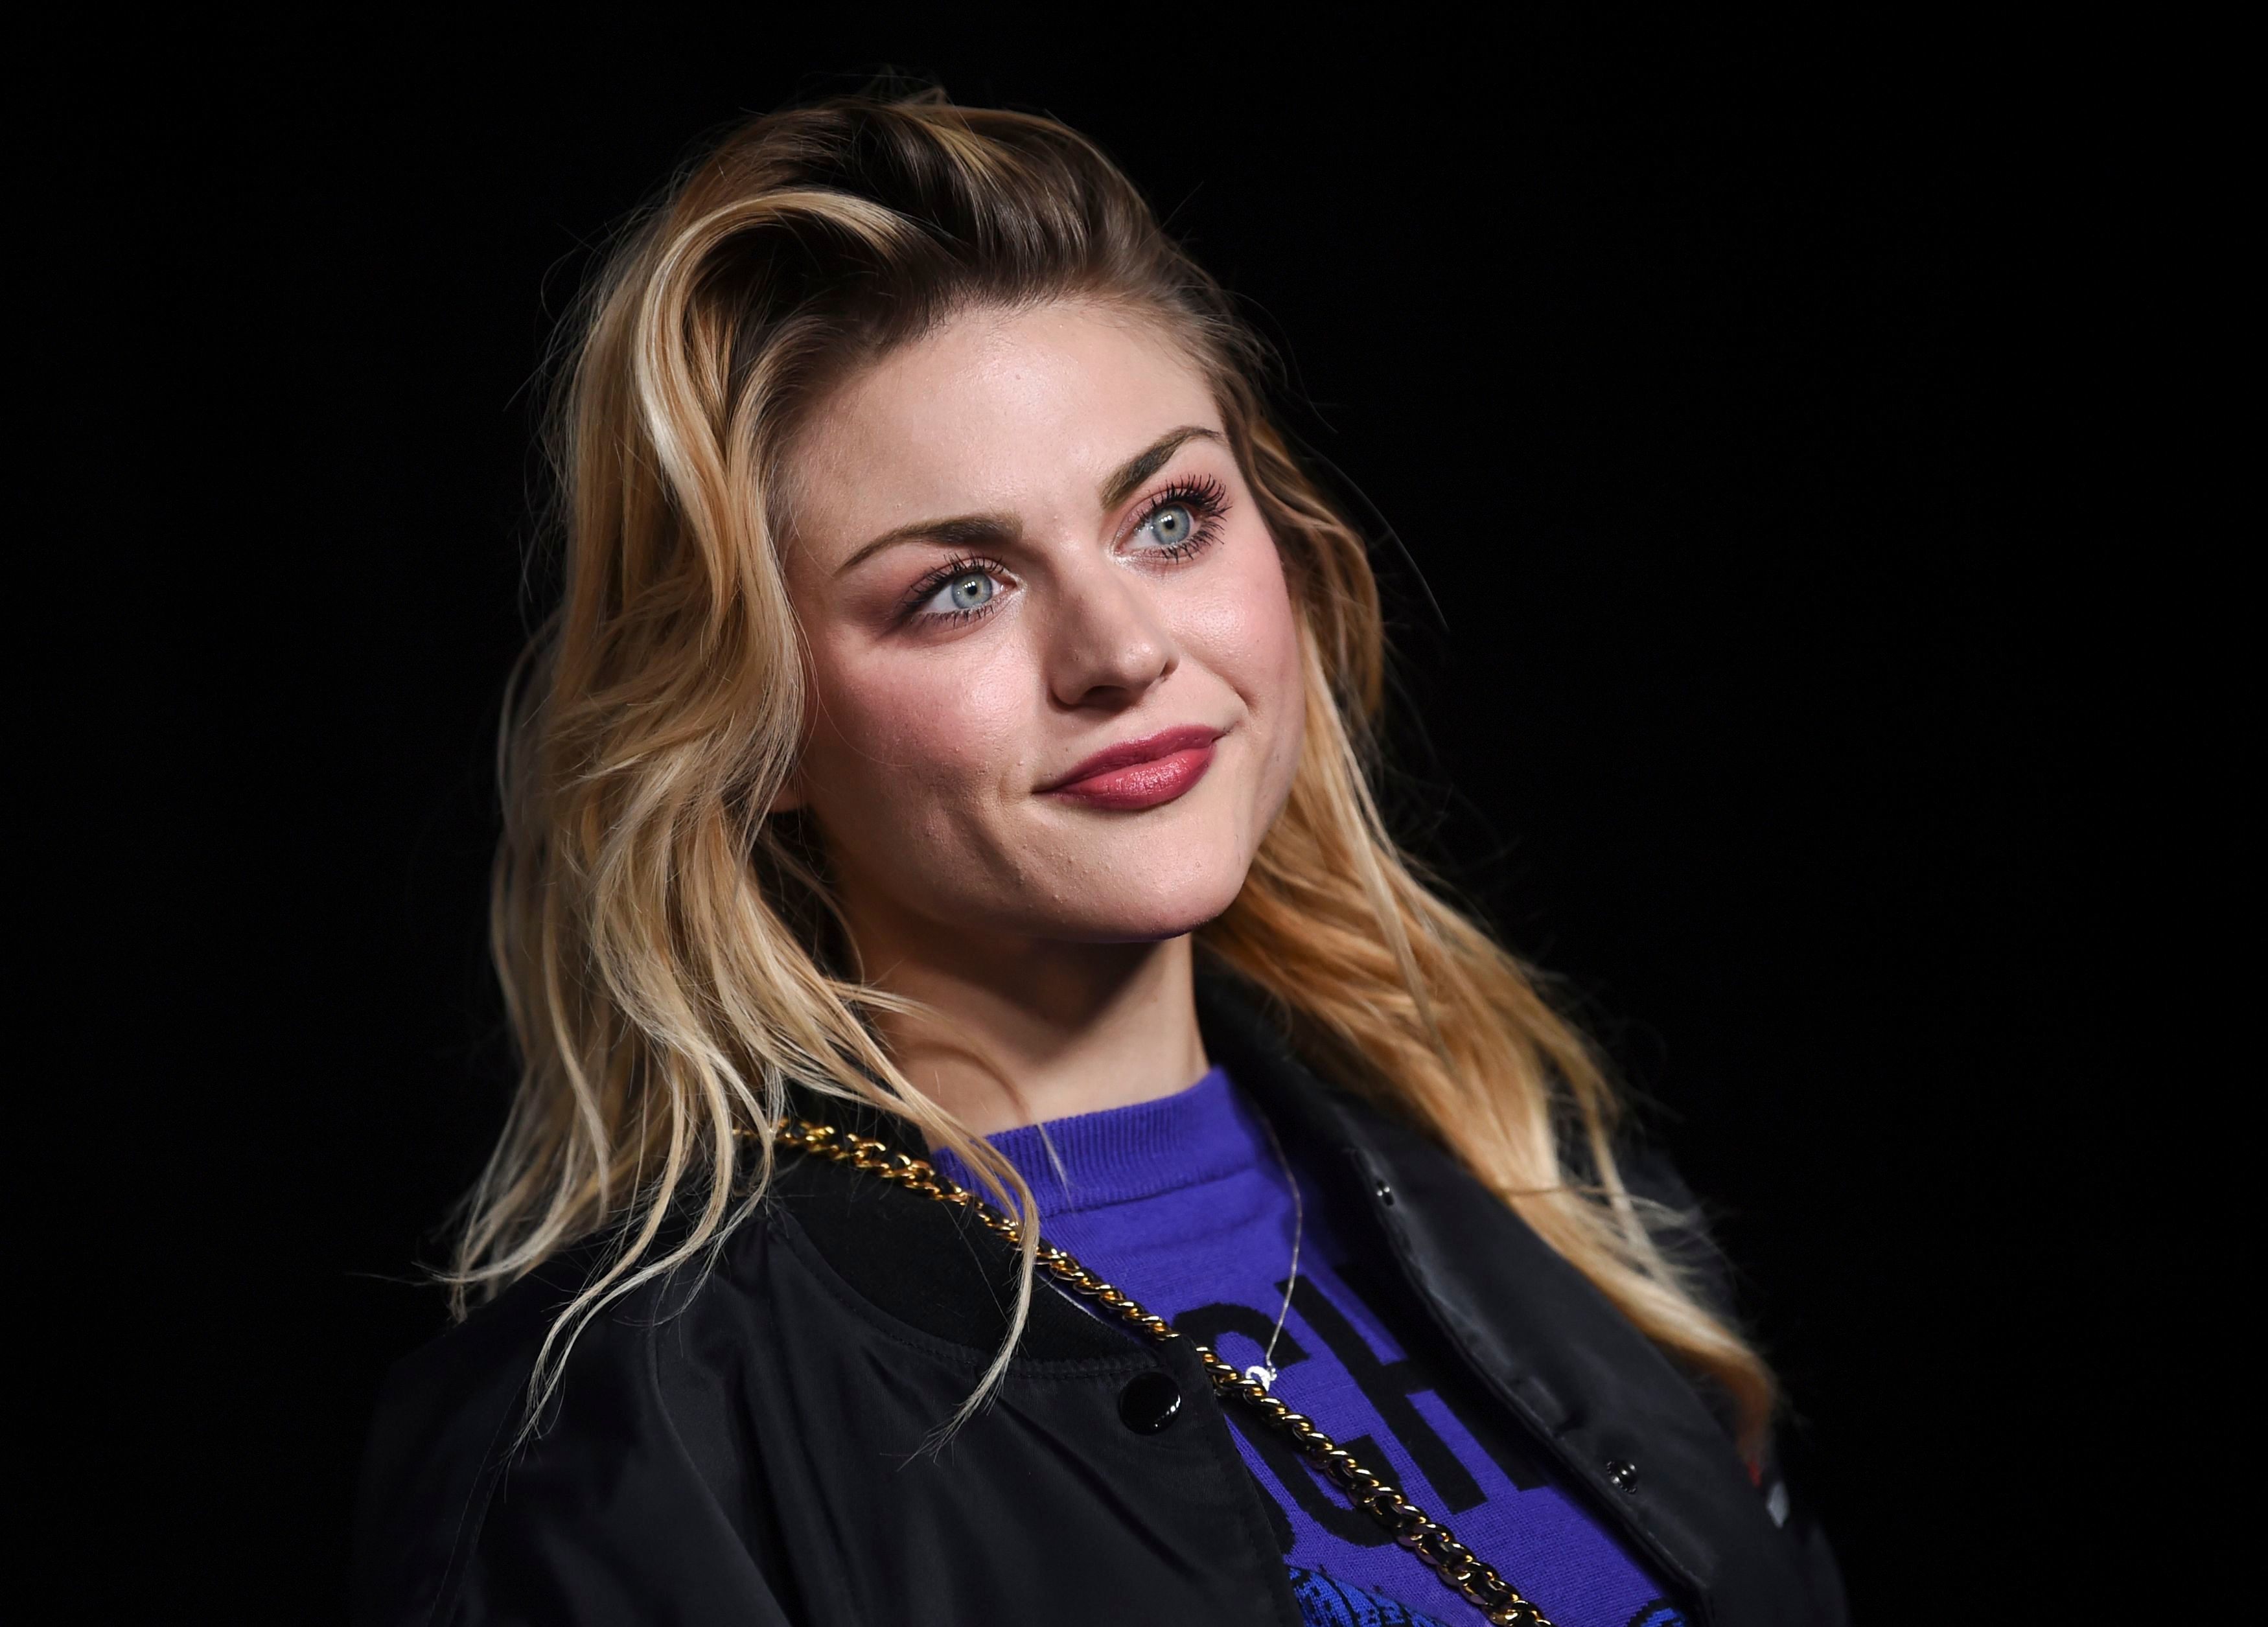 <p>Frances Bean Cobain hasn't exactly become a musician like her parents, Kurt Cobain and <a href="https://www.wonderwall.com/celebrity/profiles/overview/courtney-love-806.article">Courtney Love</a> (though she did debut an original song -- she has a beautiful voice -- on social media in 2018). Instead, she's more of a <a href="http://www.wonderwall.com/celebrity/profiles/life-in-photos-frances-bean-cobain-21310.gallery?photoId=92347">visual artist</a>. She also <a href="http://www.wonderwall.com/entertainment/courtney-love-frances-cobain-hug-it-out-for-kurt-cobain-movie-premiere-at-sundance-1857121.article">executive produced</a> "Kurt Cobain: Montage of Heck," the 2015 HBO documentary about her dad's life. In March 2016, Frances (who was born in 1992) <a href="http://www.wonderwall.com/news/frances-bean-cobain-divorce-isaiah-silva-1913321.article">filed for divorce</a> from husband Isaiah Silva, whom she married in June 2014. She's seen here at the Moschino x H&M fashion show in New York City on Oct. 24, 2018.</p>